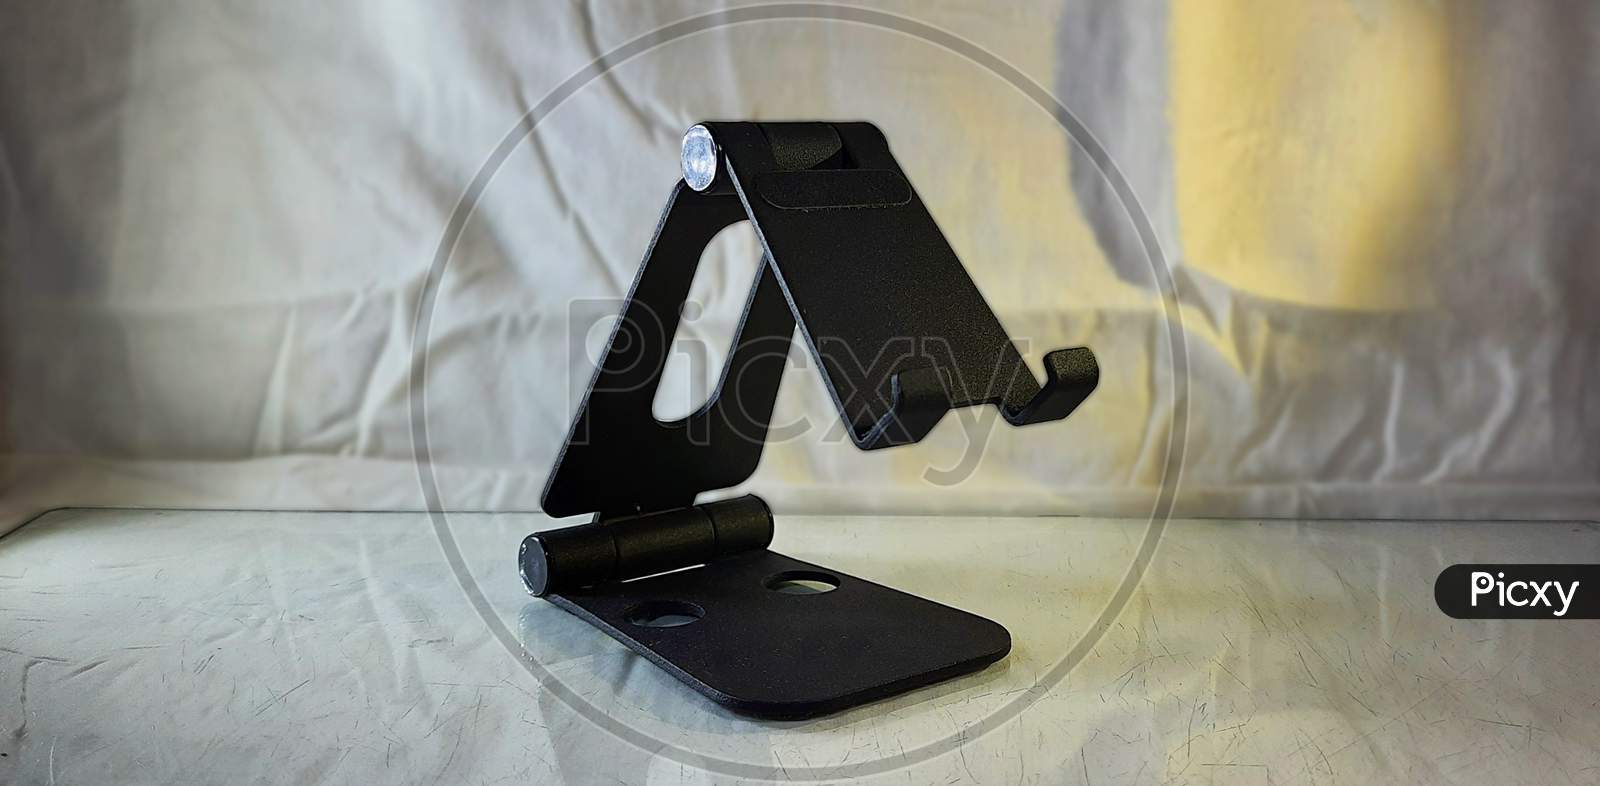 Mobile Stand Black